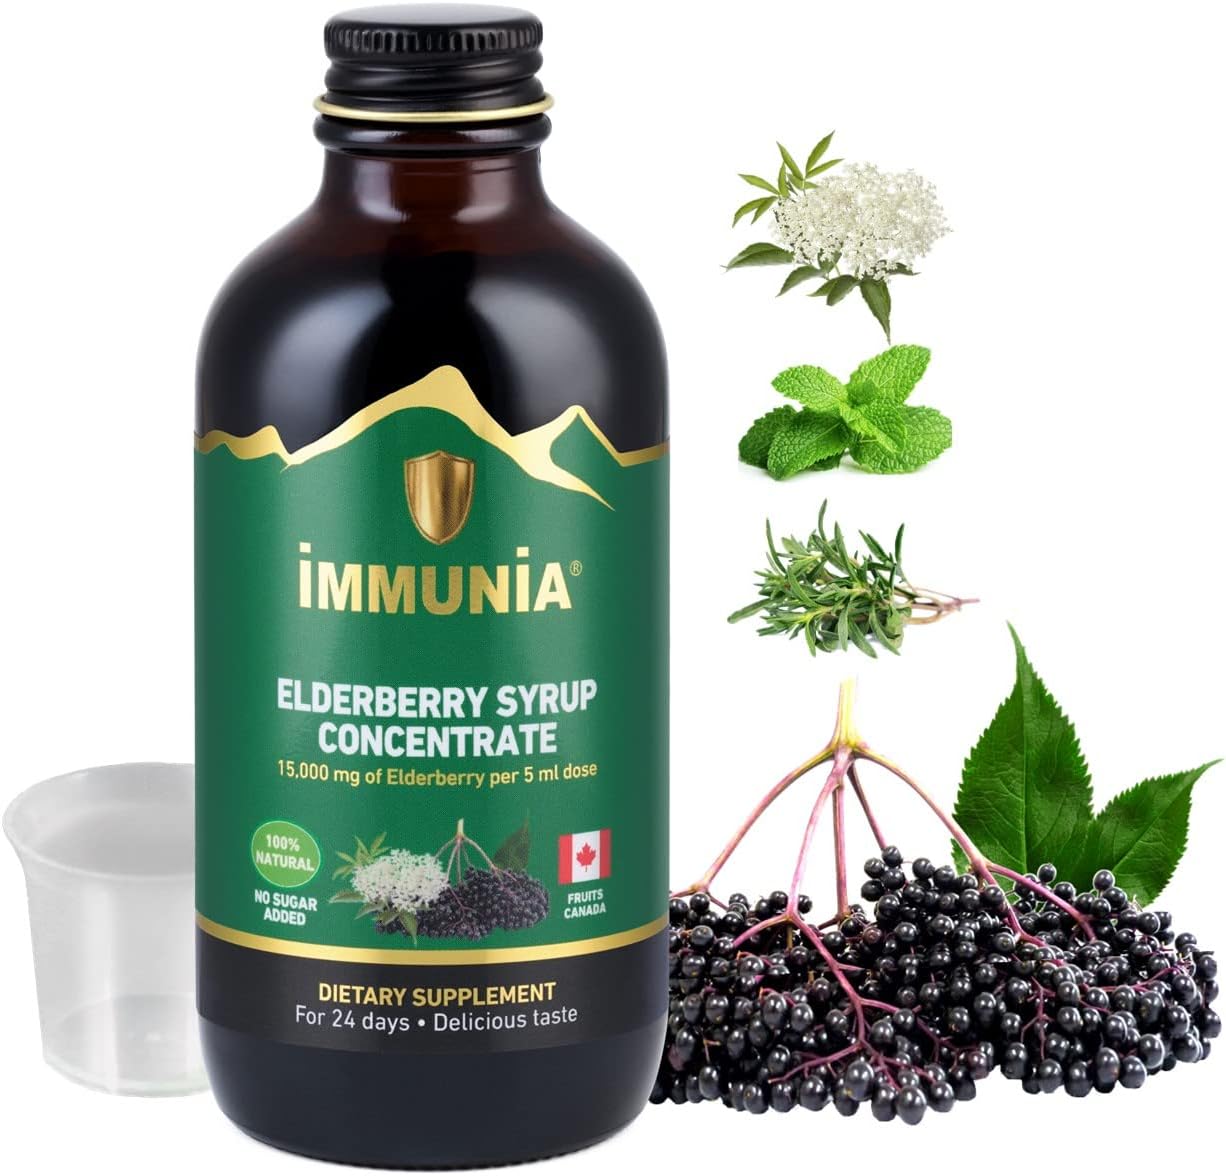 Immunia Elderberry Syrup for Adults Elderberry Concentrate with Elderflower, Thyme and Peppermint. No Sugar Added. Delicious Taste. 24 Days/Bottle. (1-Pack)